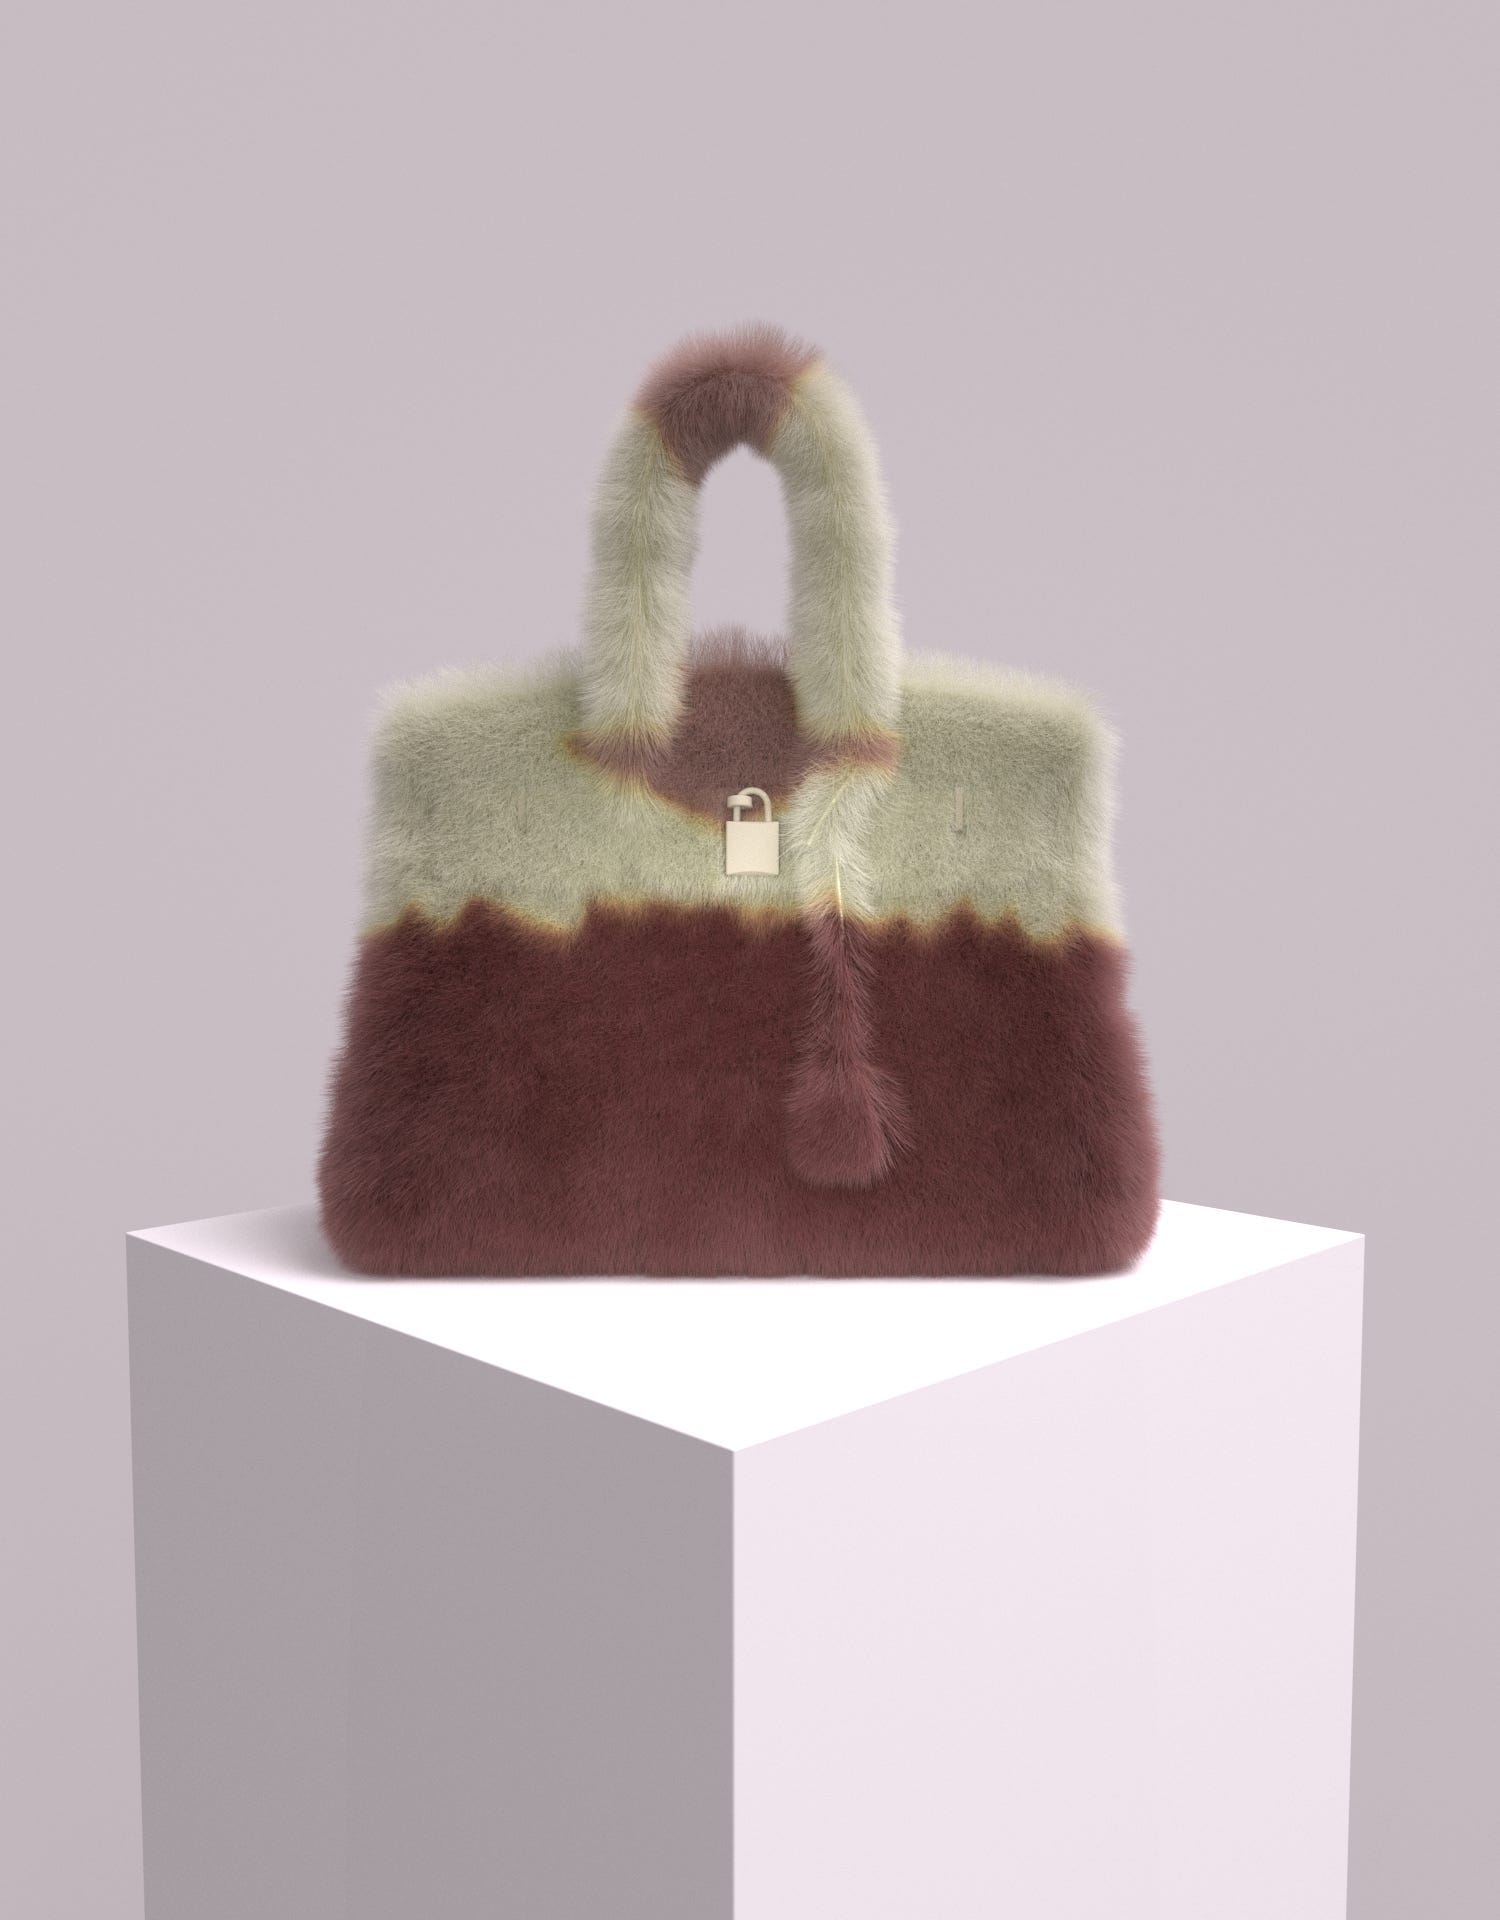 A digital rendering of a Birkin style handbag covered in green and brown faux fur